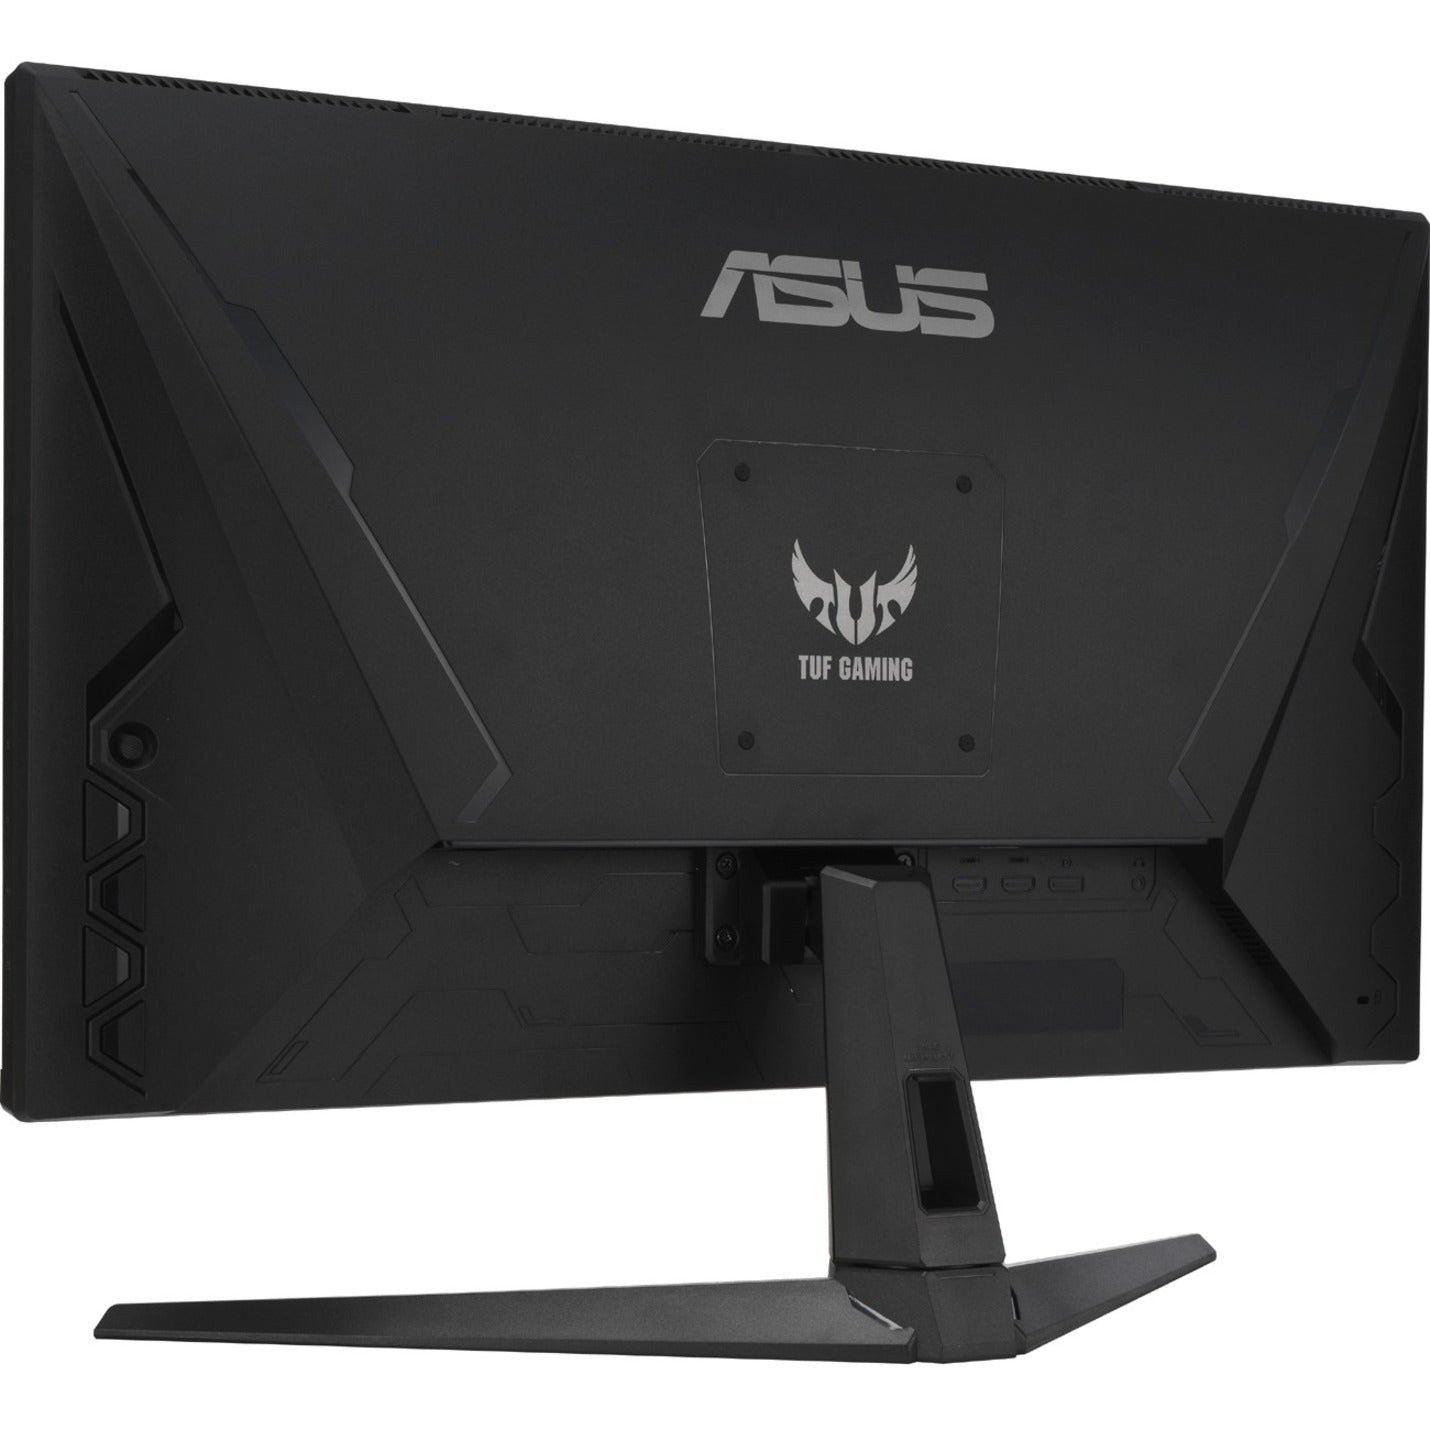 TUF VG289Q1A 28" 4K UHD Gaming LCD Monitor - Immersive Gaming Experience, Adaptive Sync/FreeSync, 90% DCI-P3 Color Gamut